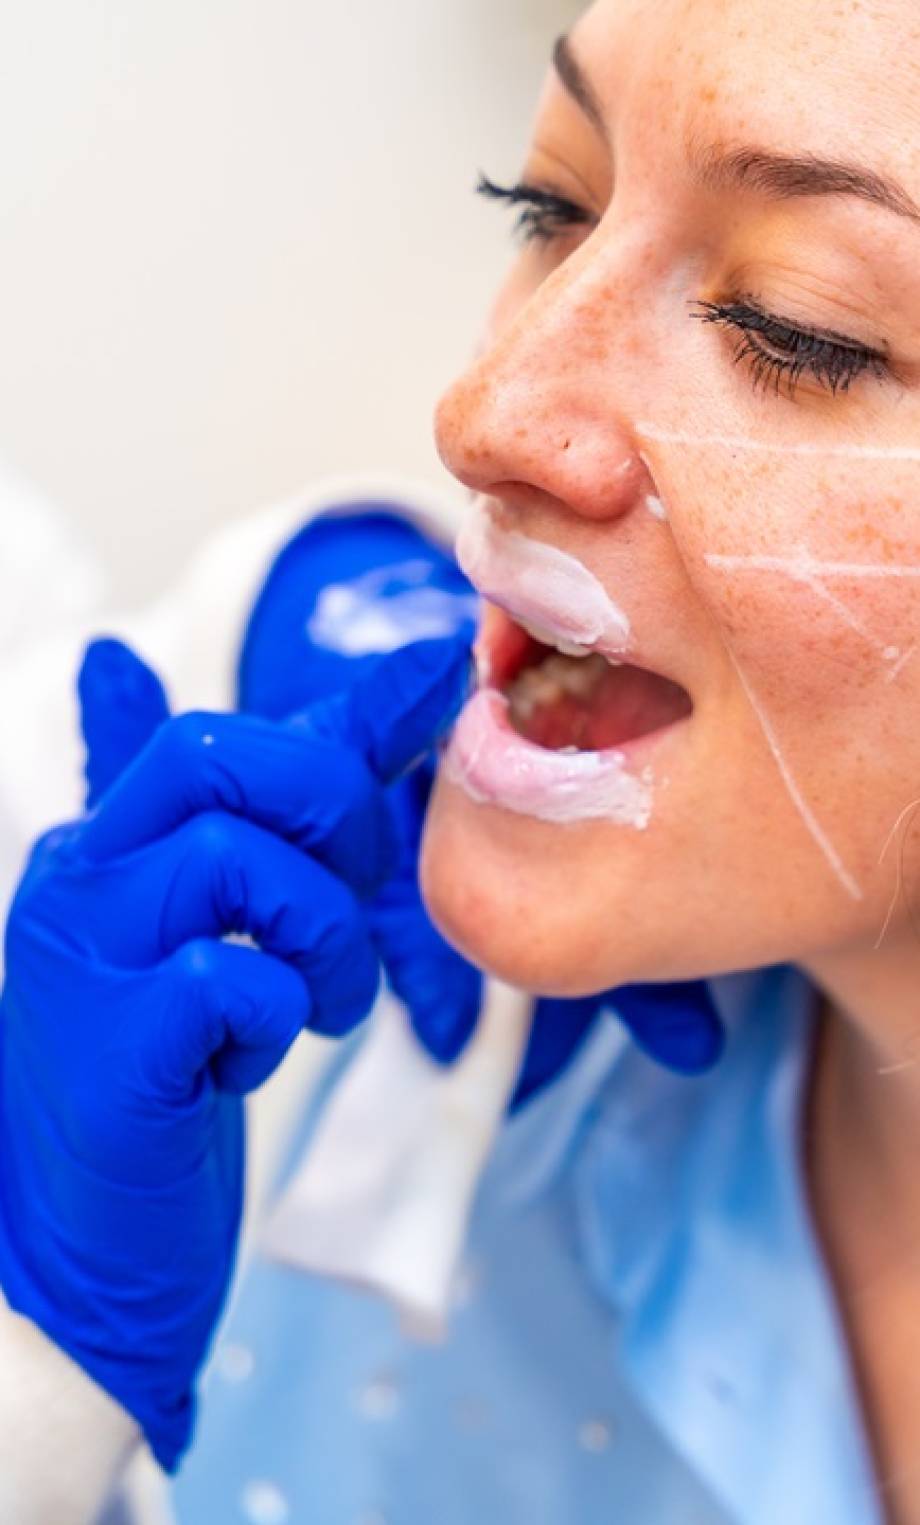 Aesthetic female doctor applying numbing cream on the lips of a patient before injecting hyaluronic acid